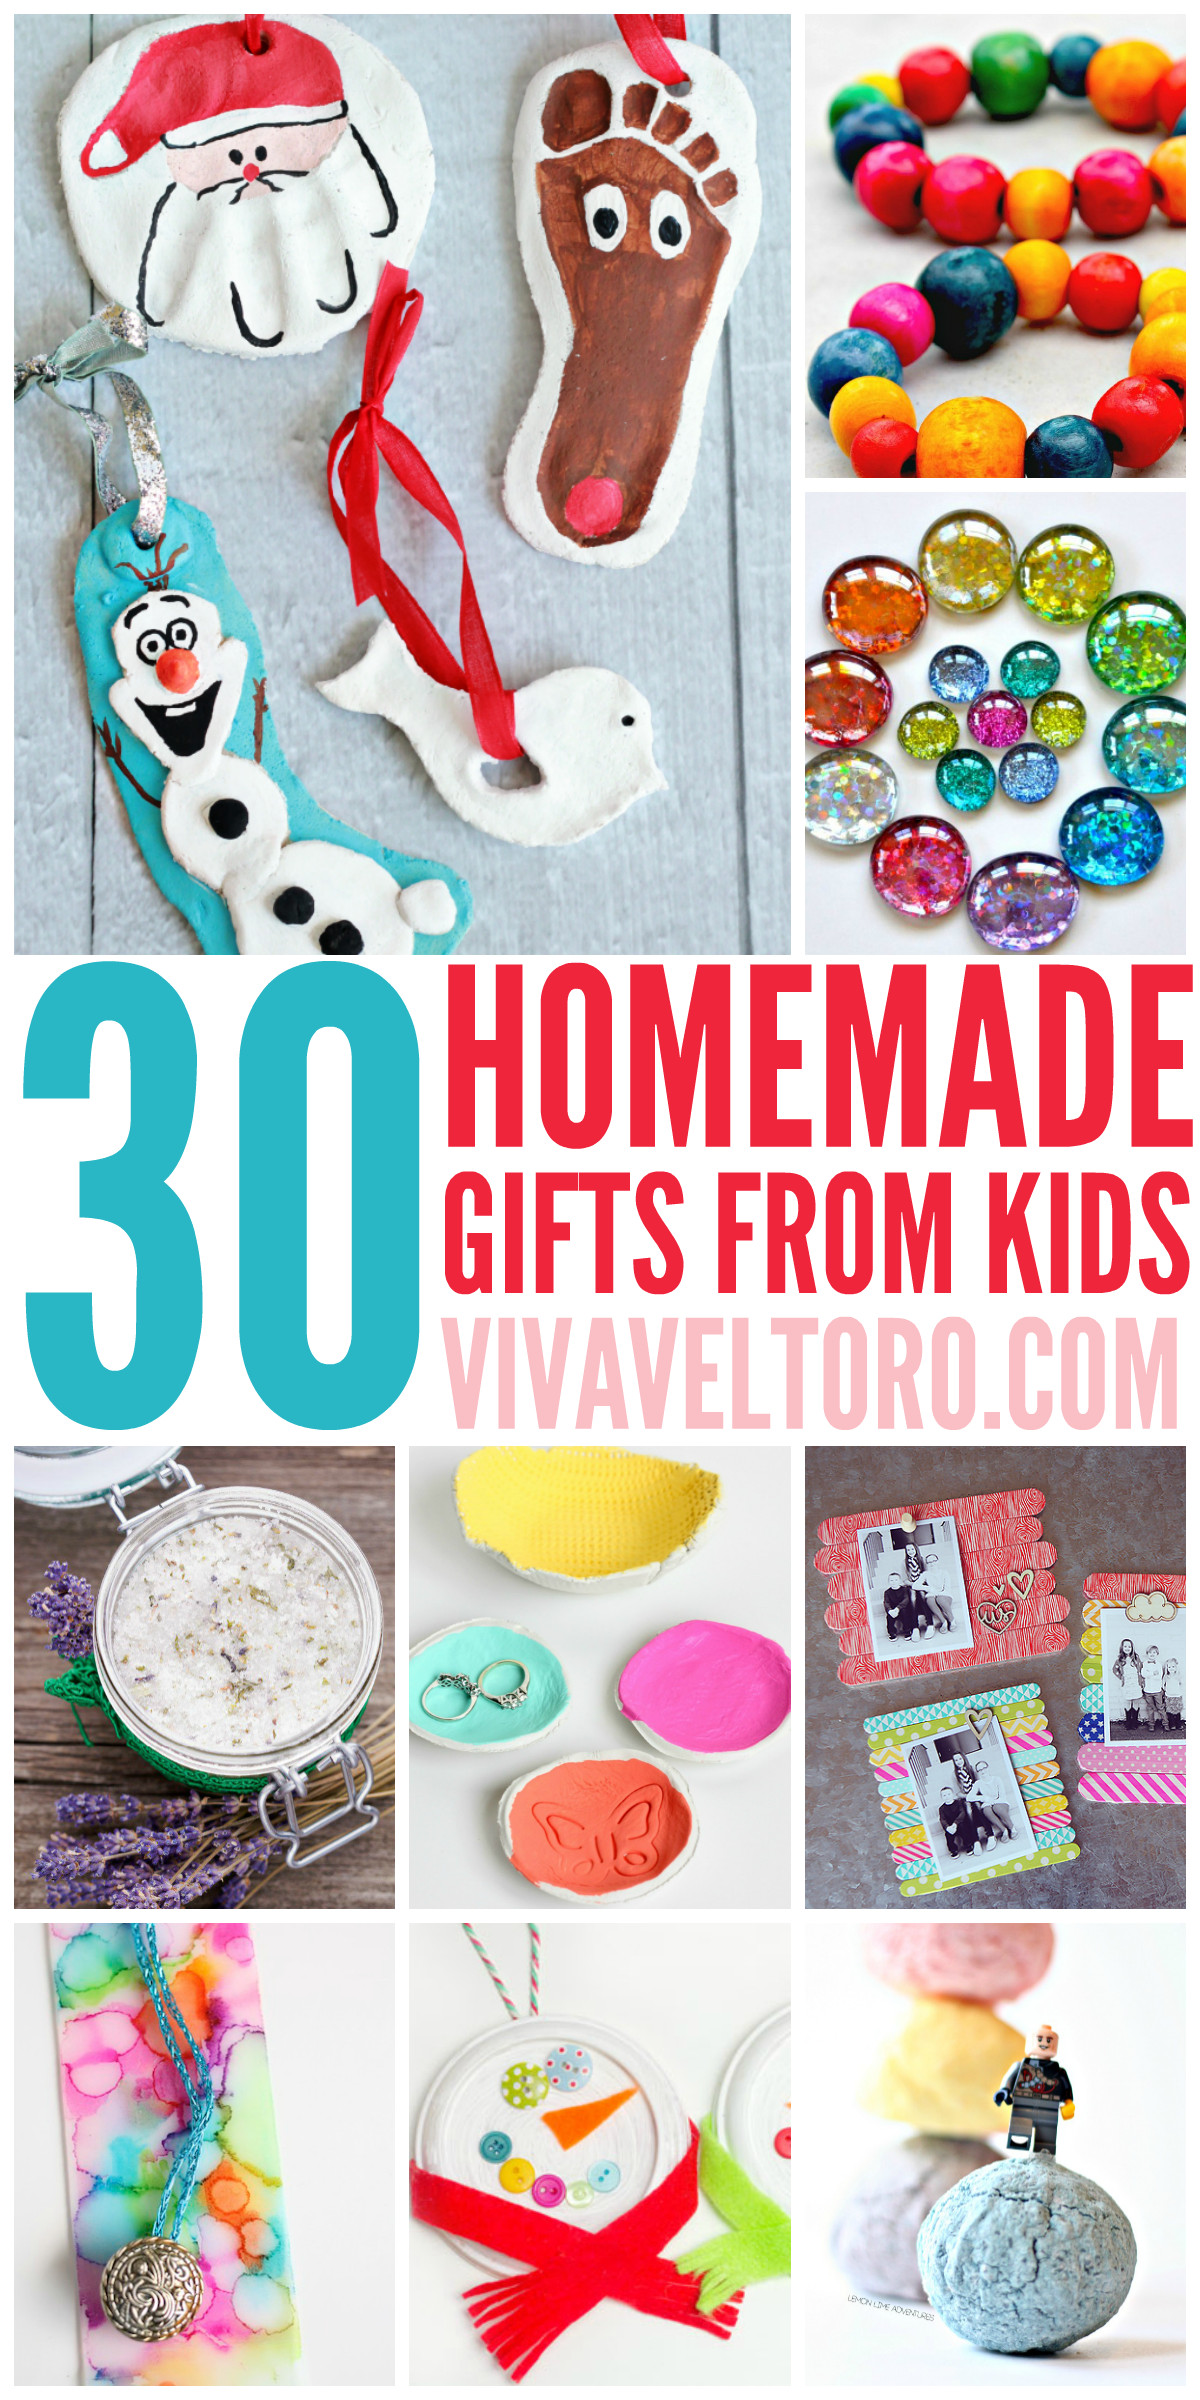 DIY Christmas Gift For Kids
 This list of full of crafts and DIY homemade t ideas